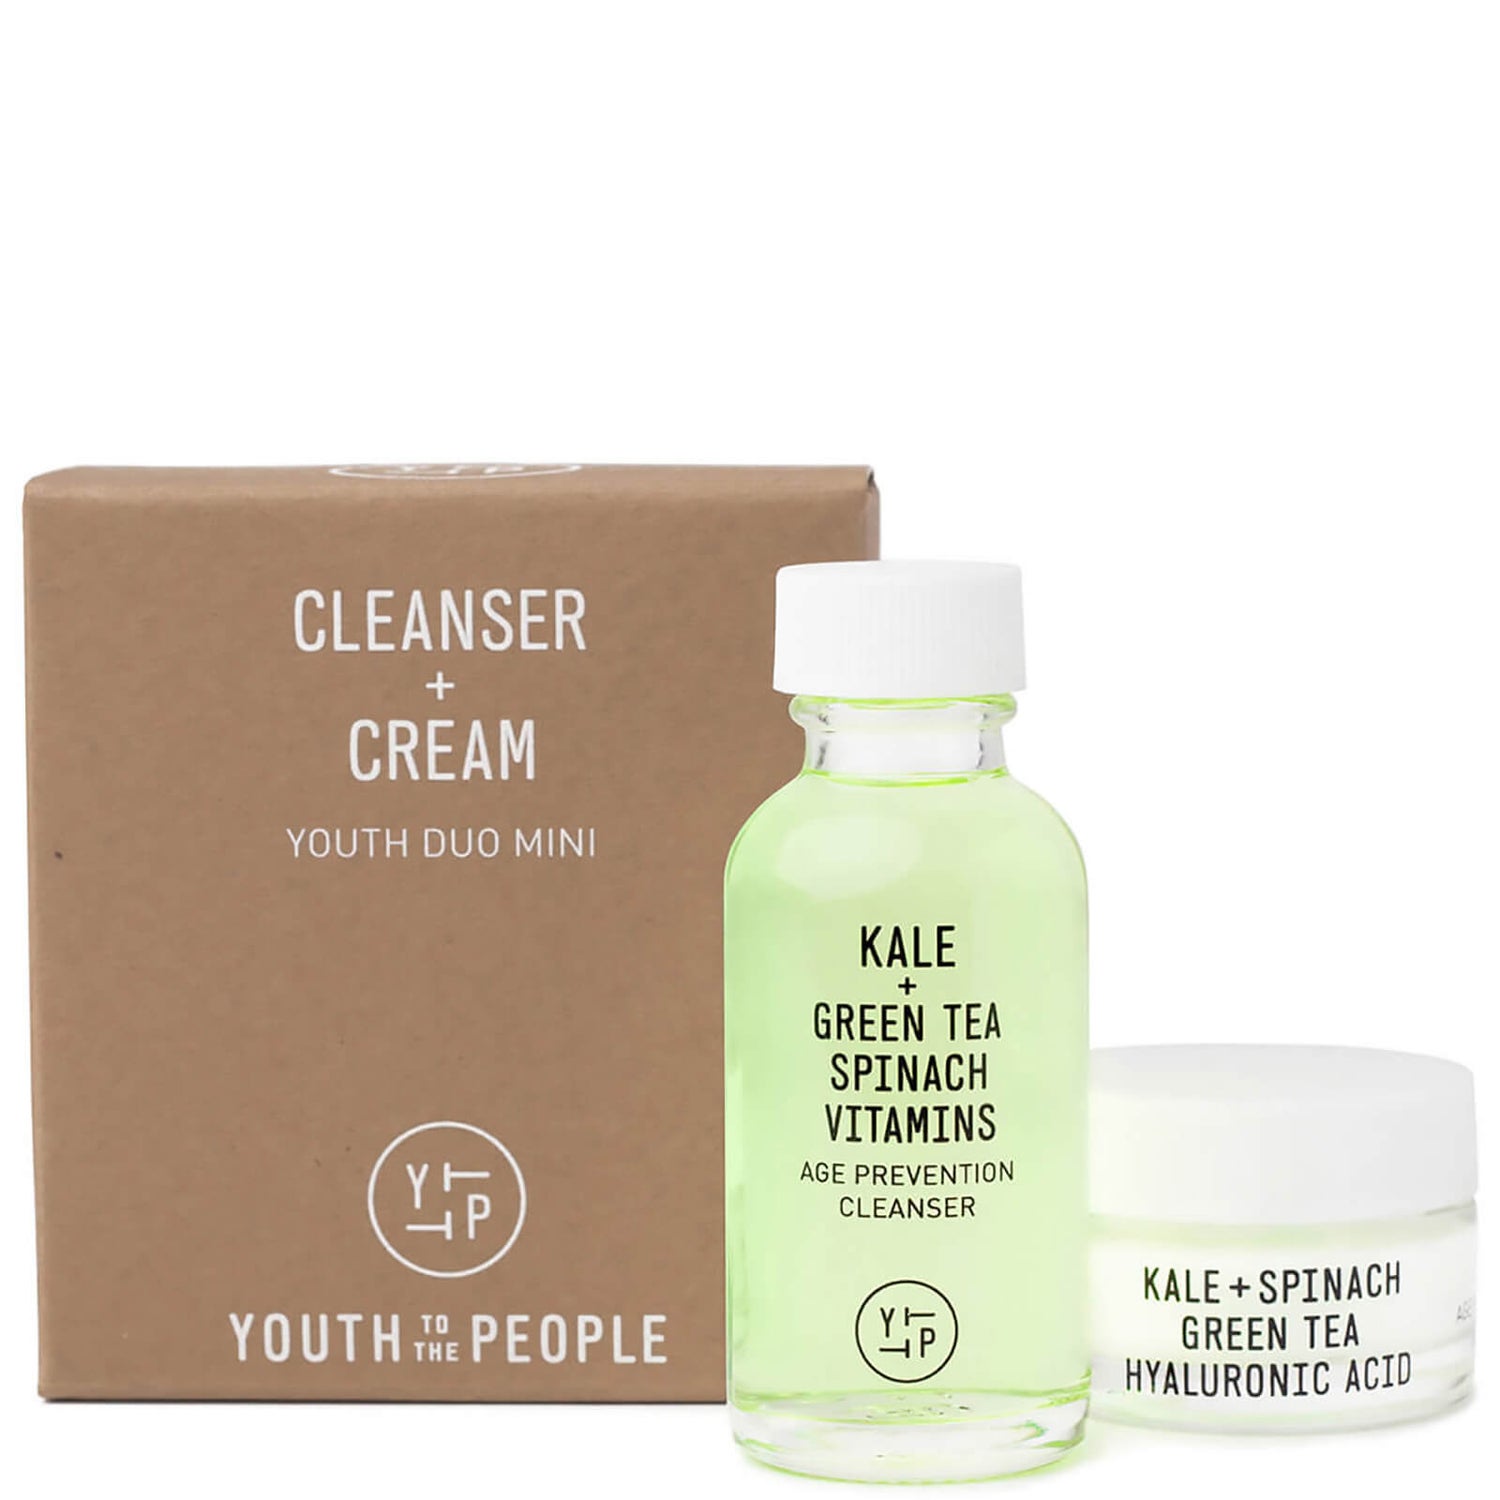 Youth To The People Cleanser + Cream Youth Duo Mini